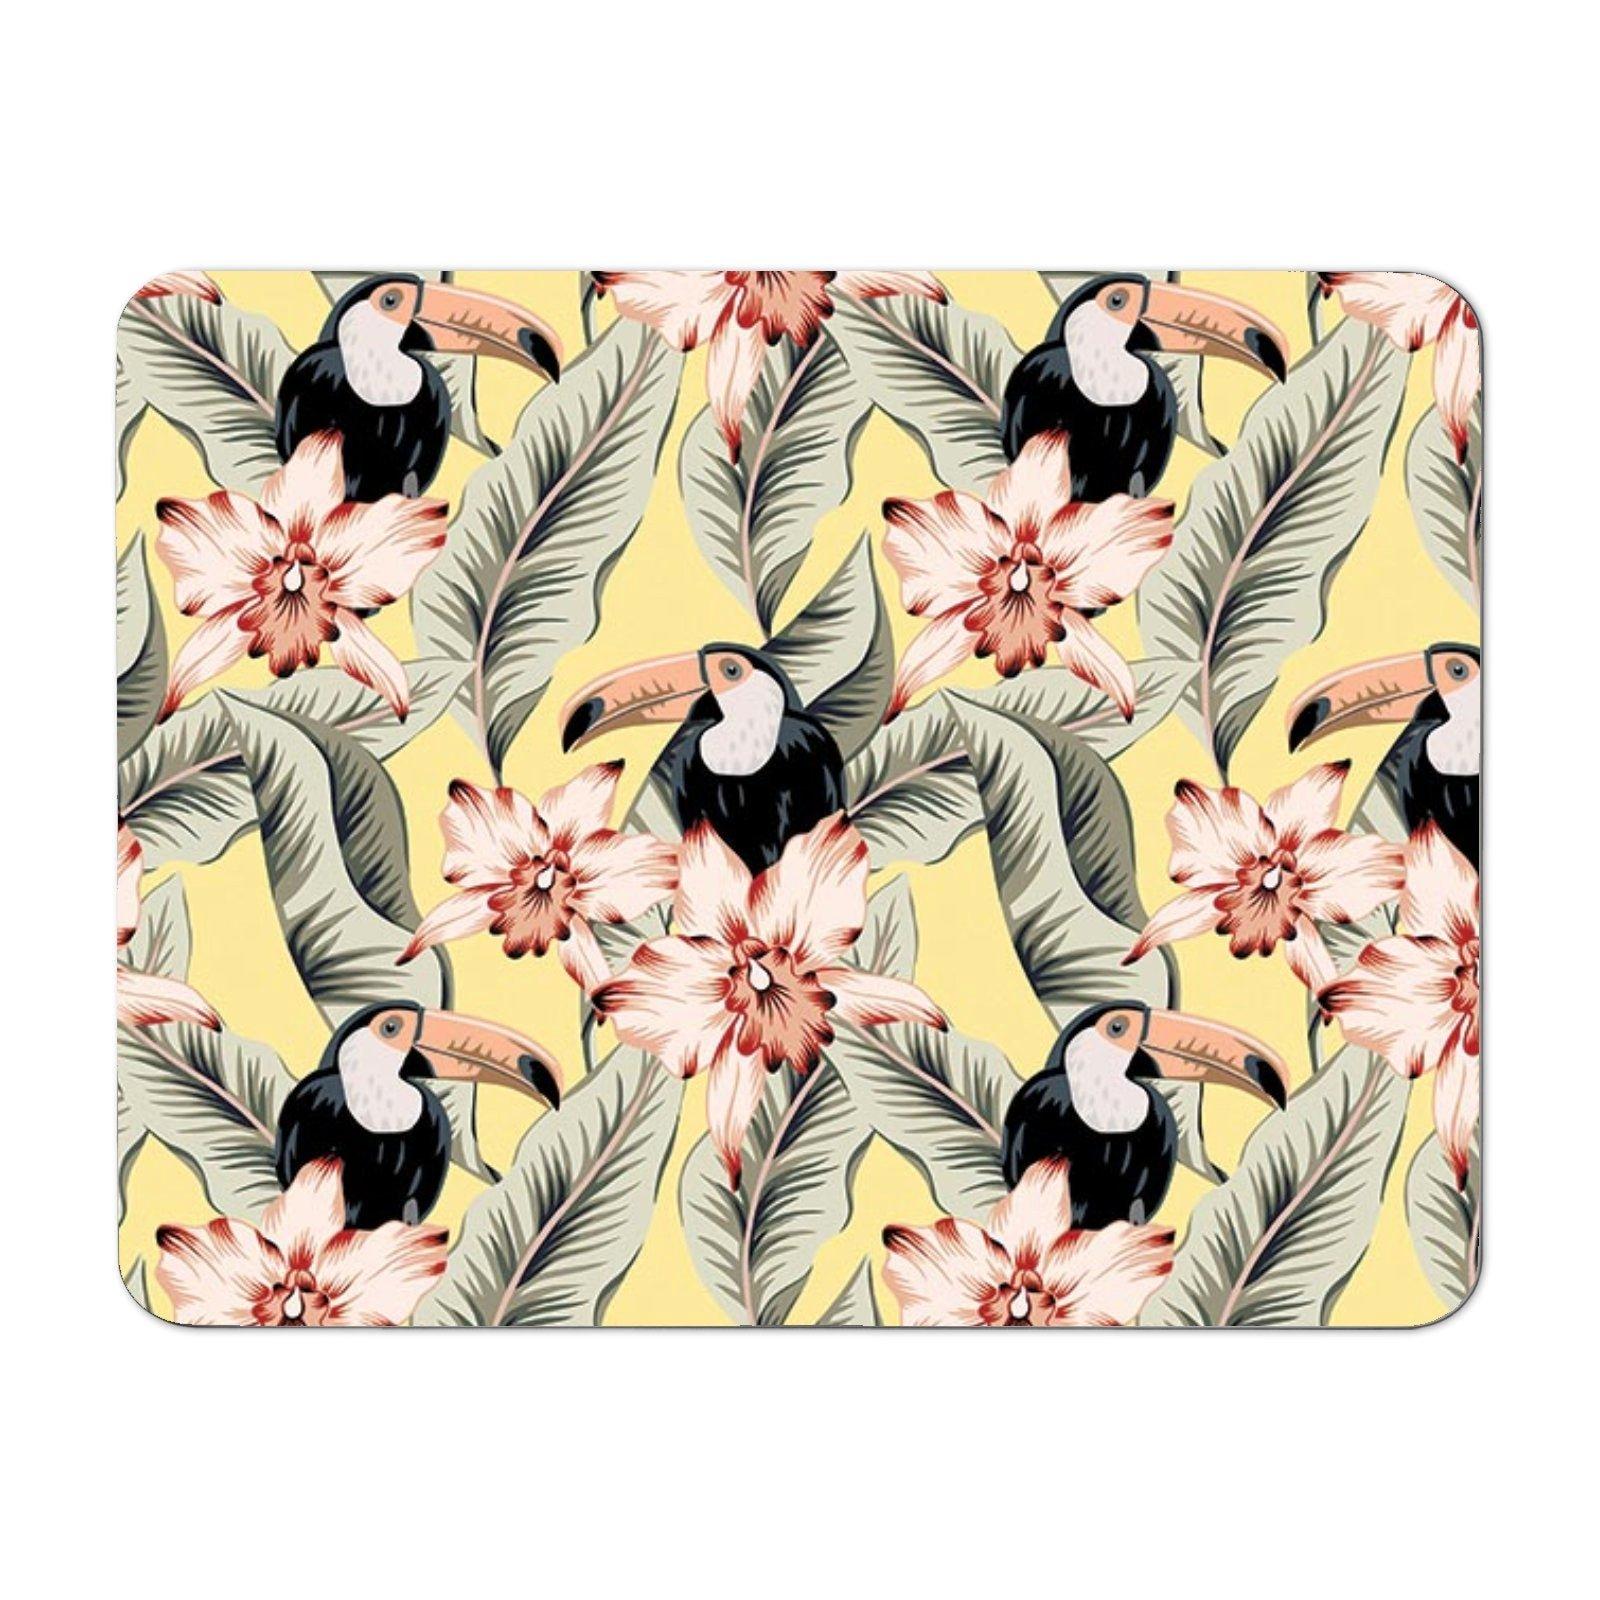 Toucans, Orchids And Palm Leaves Placemats